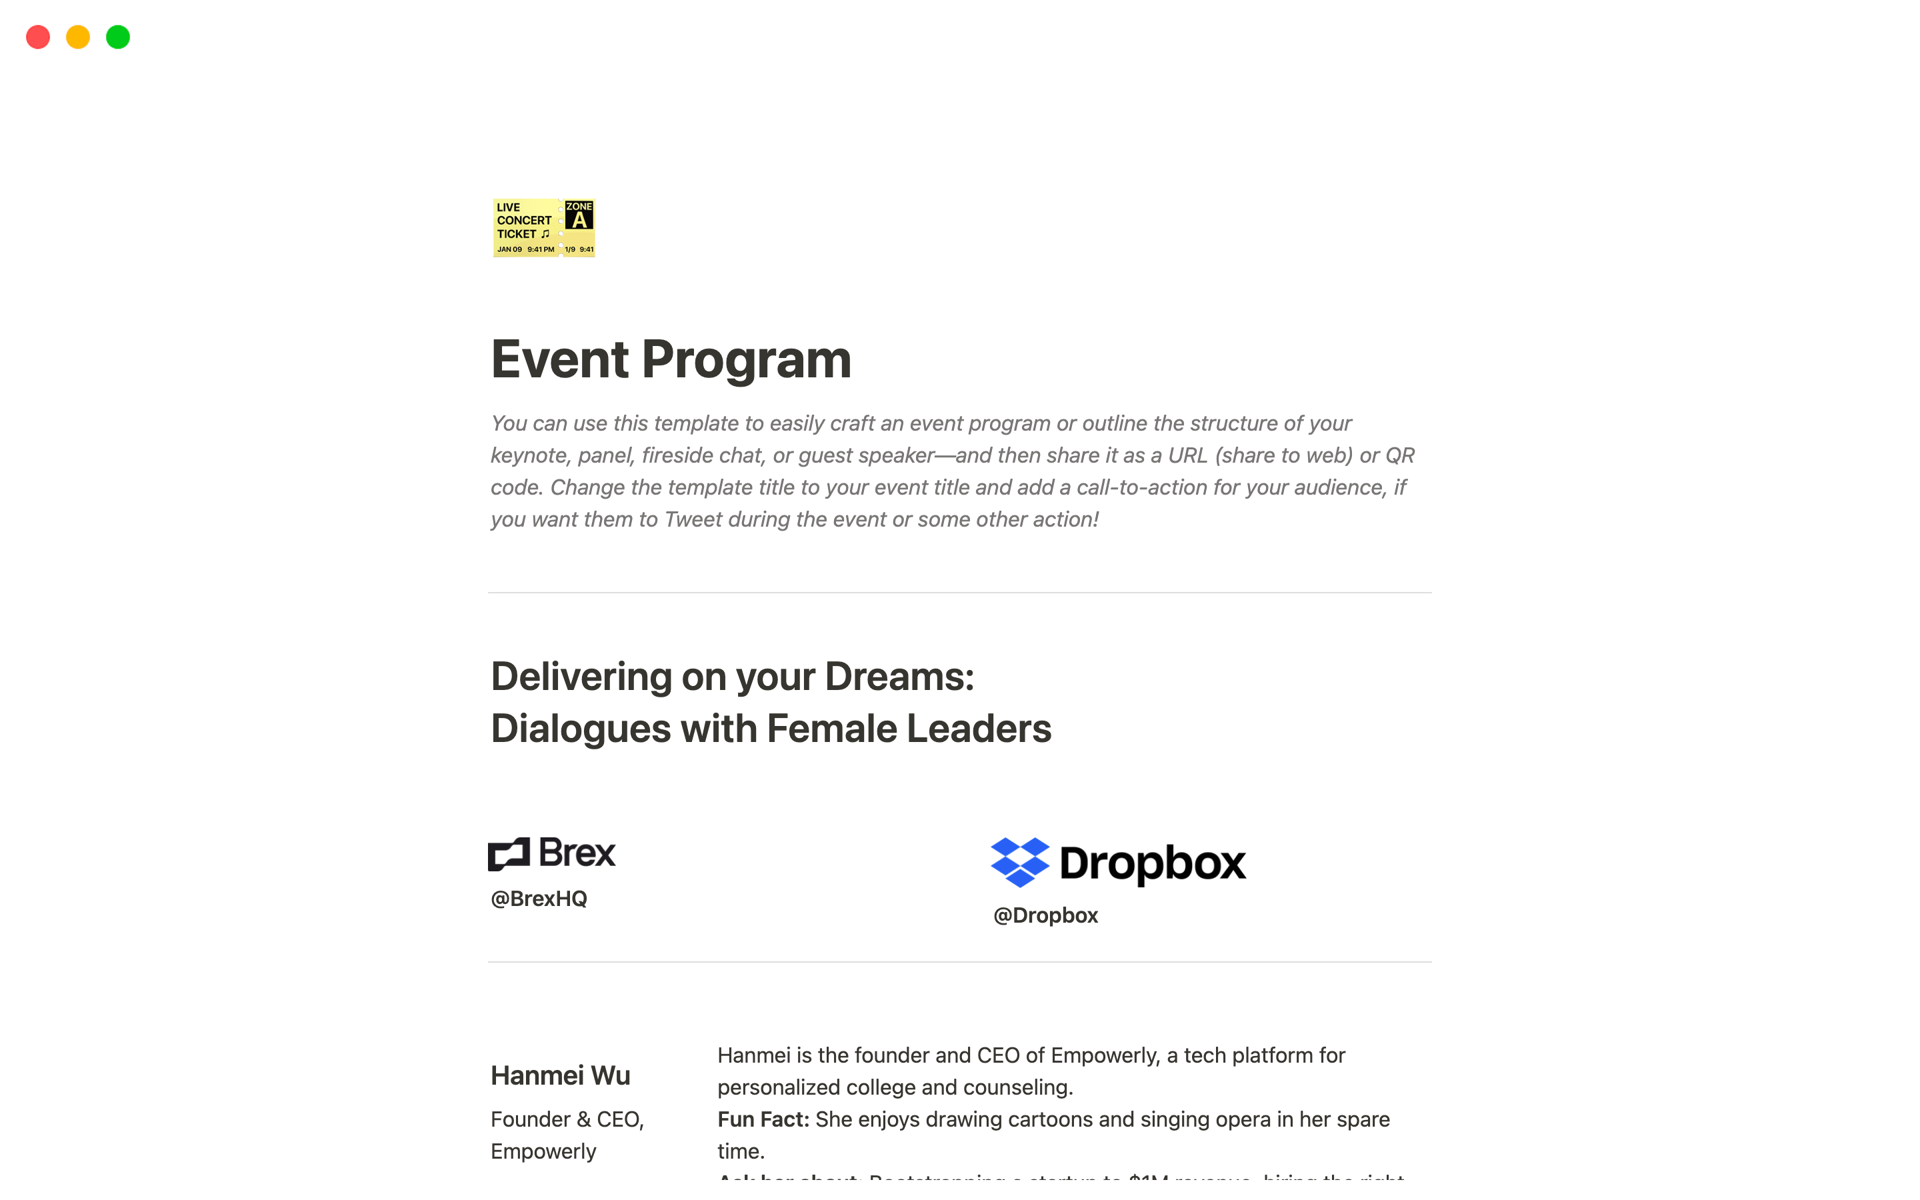 Craft an event program or schedule for your keynote, panel, fireside chat, guest speaker, or networking event to share as a Notion page.